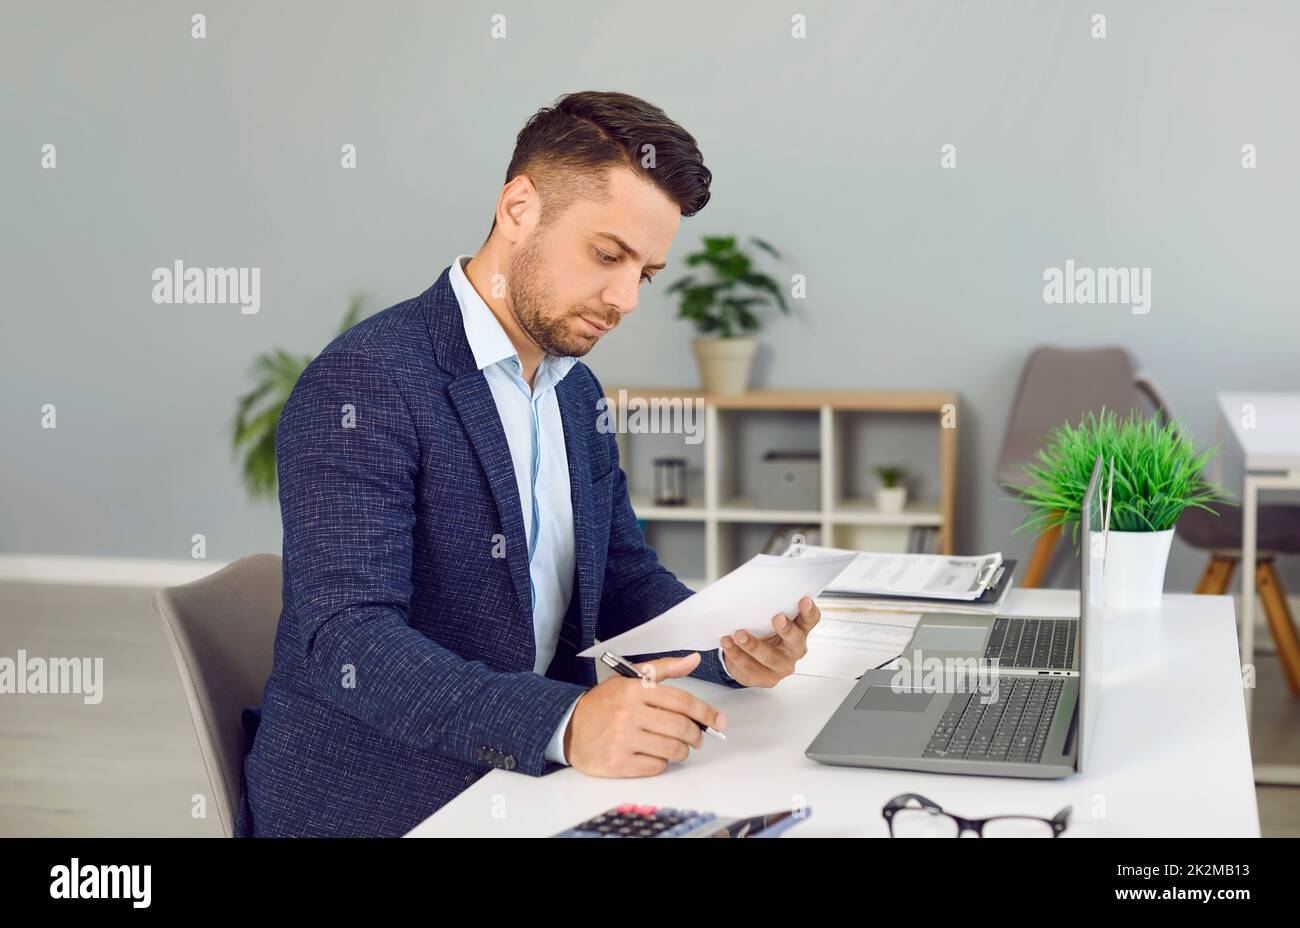 Young man reading some business documents while sitting at his desk in the office Stock Photo